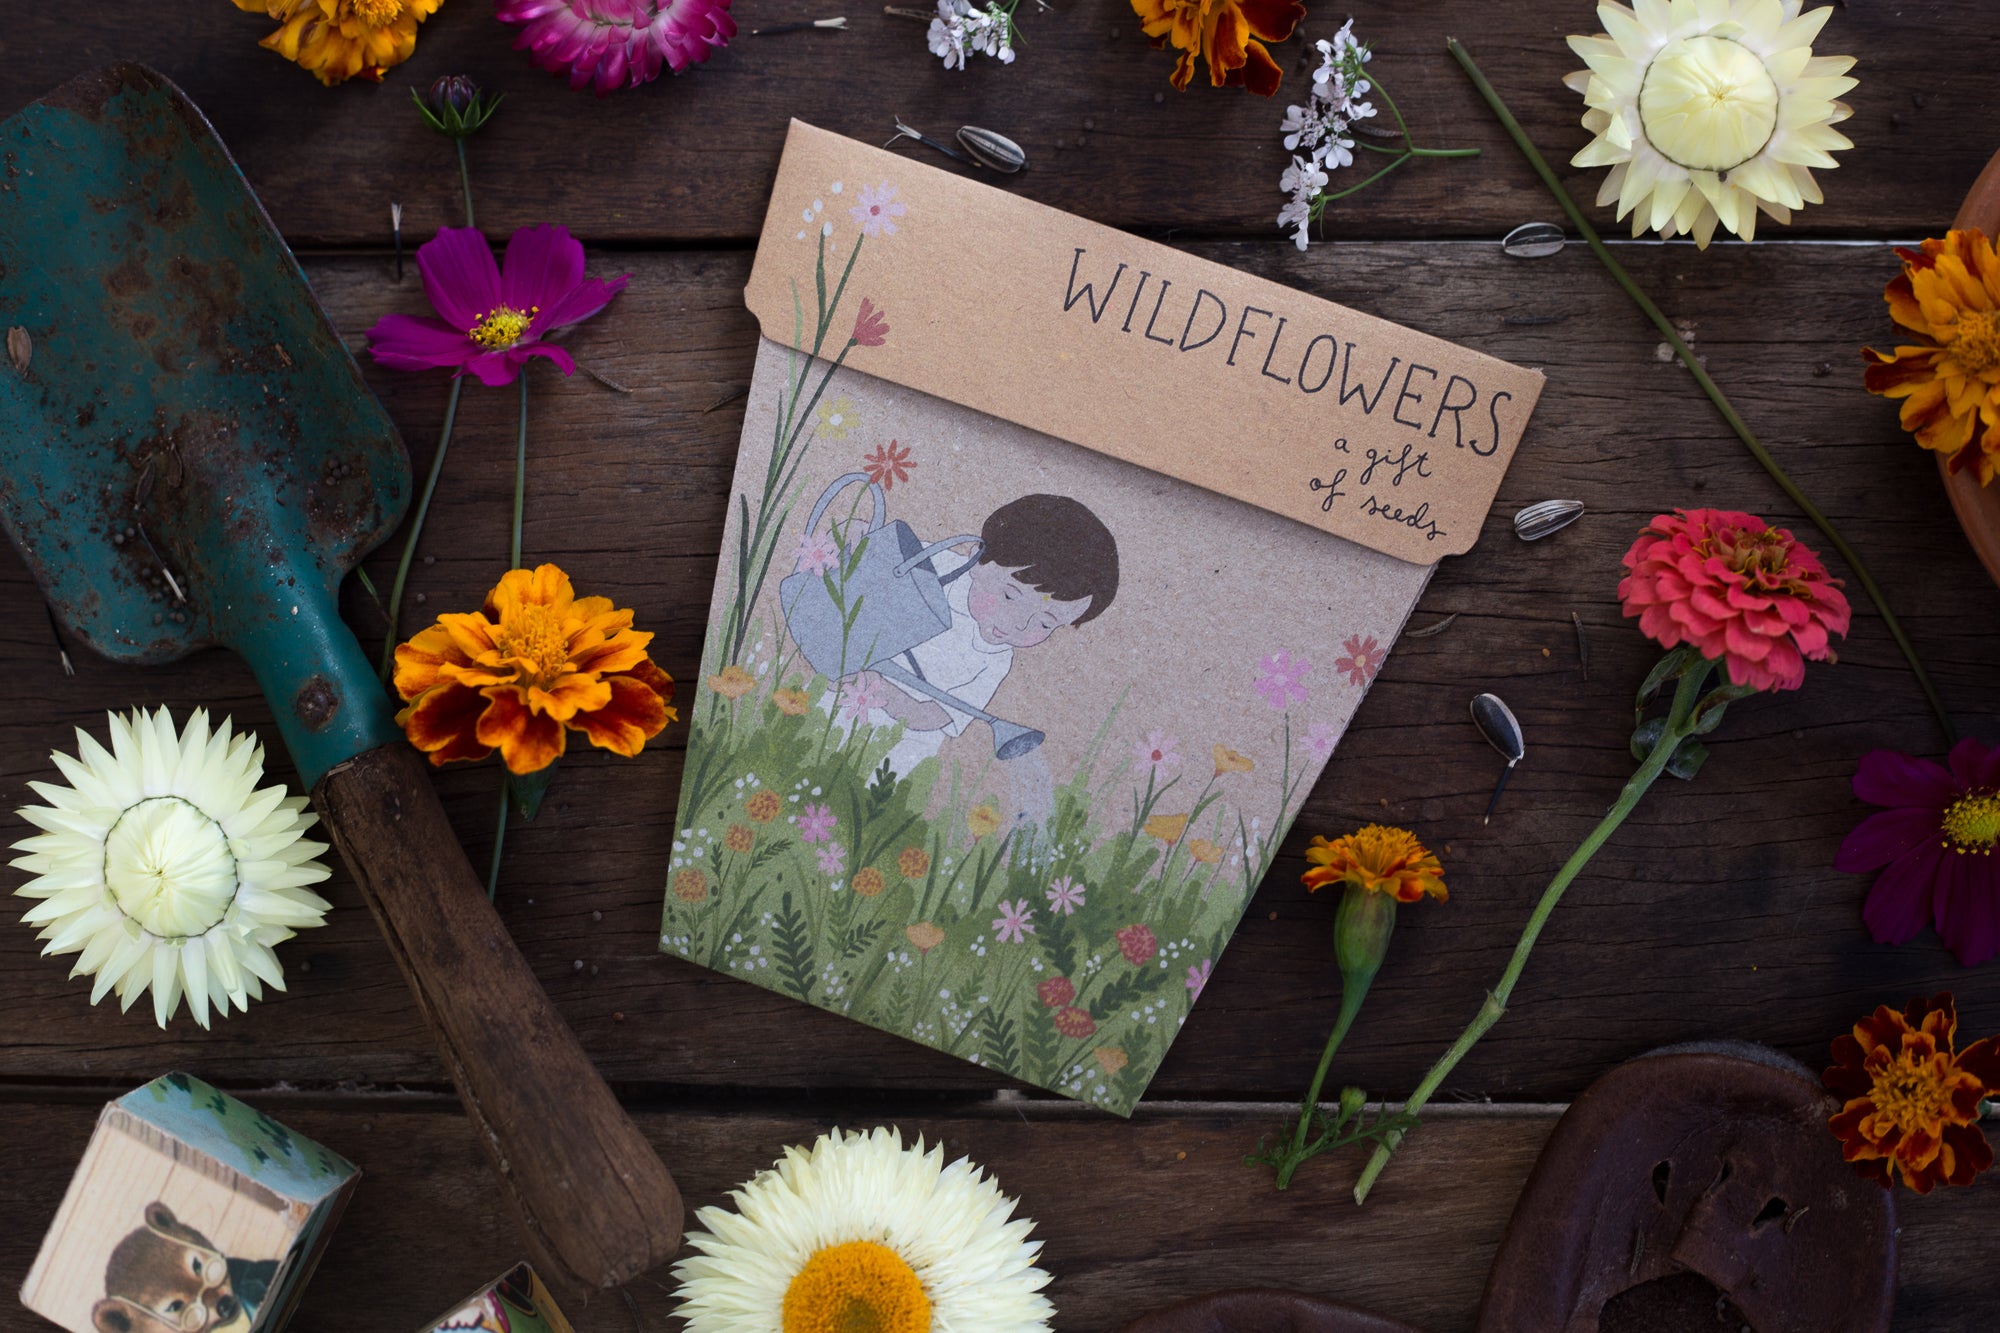 Card & Wildflowers Gift of Seeds